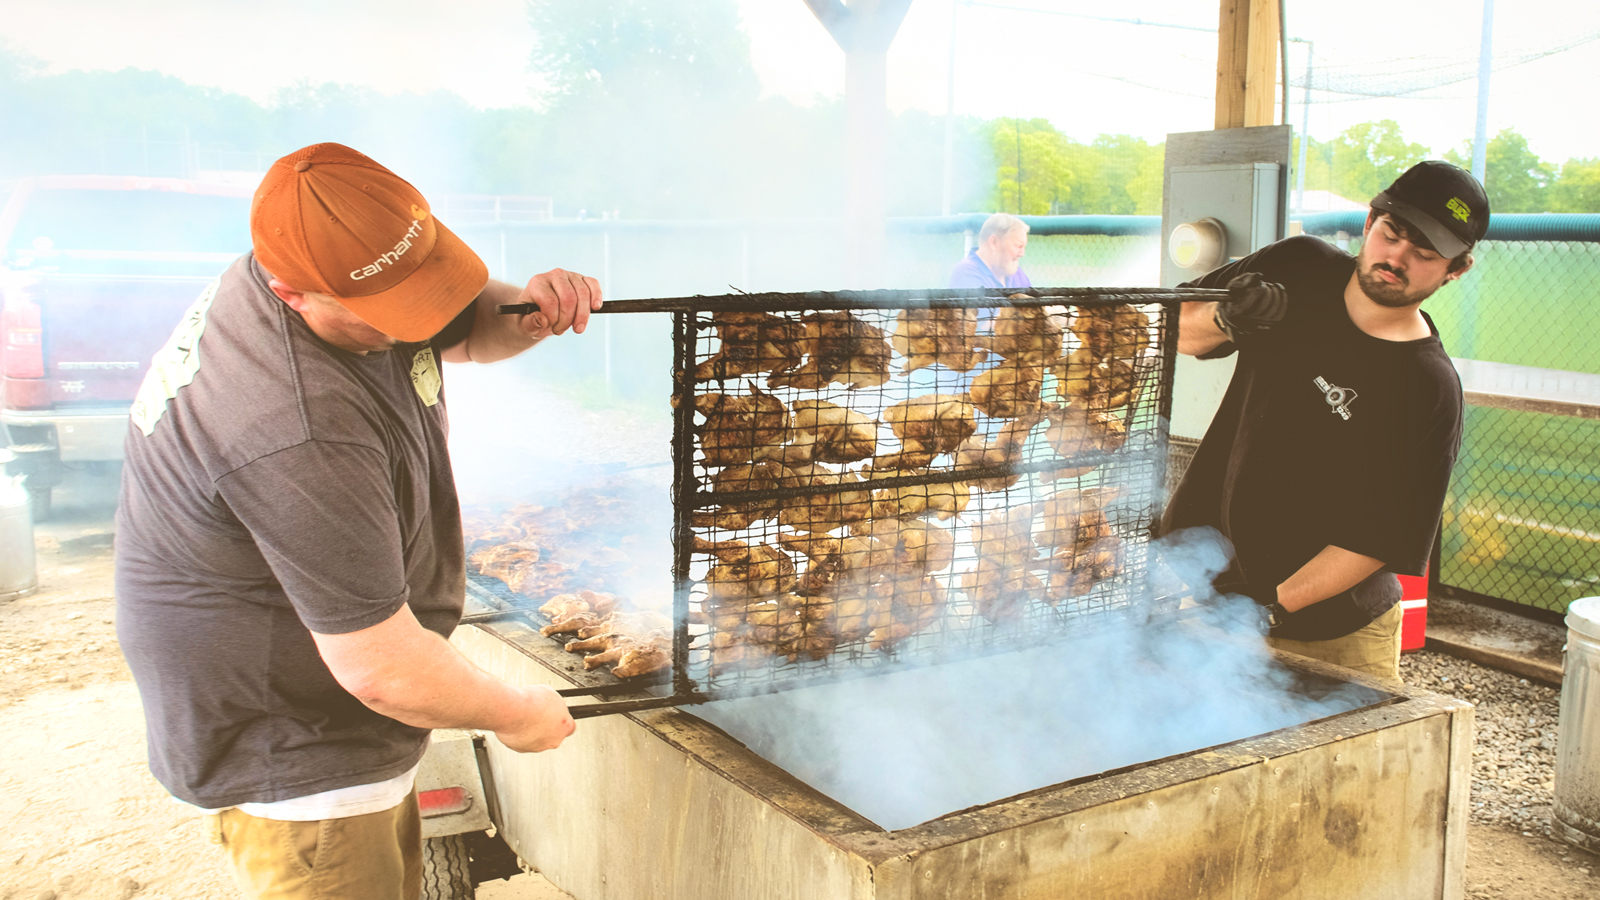 Roasters are turned during grilling at a recent barbecue featuring the Cornell Chicken recipe